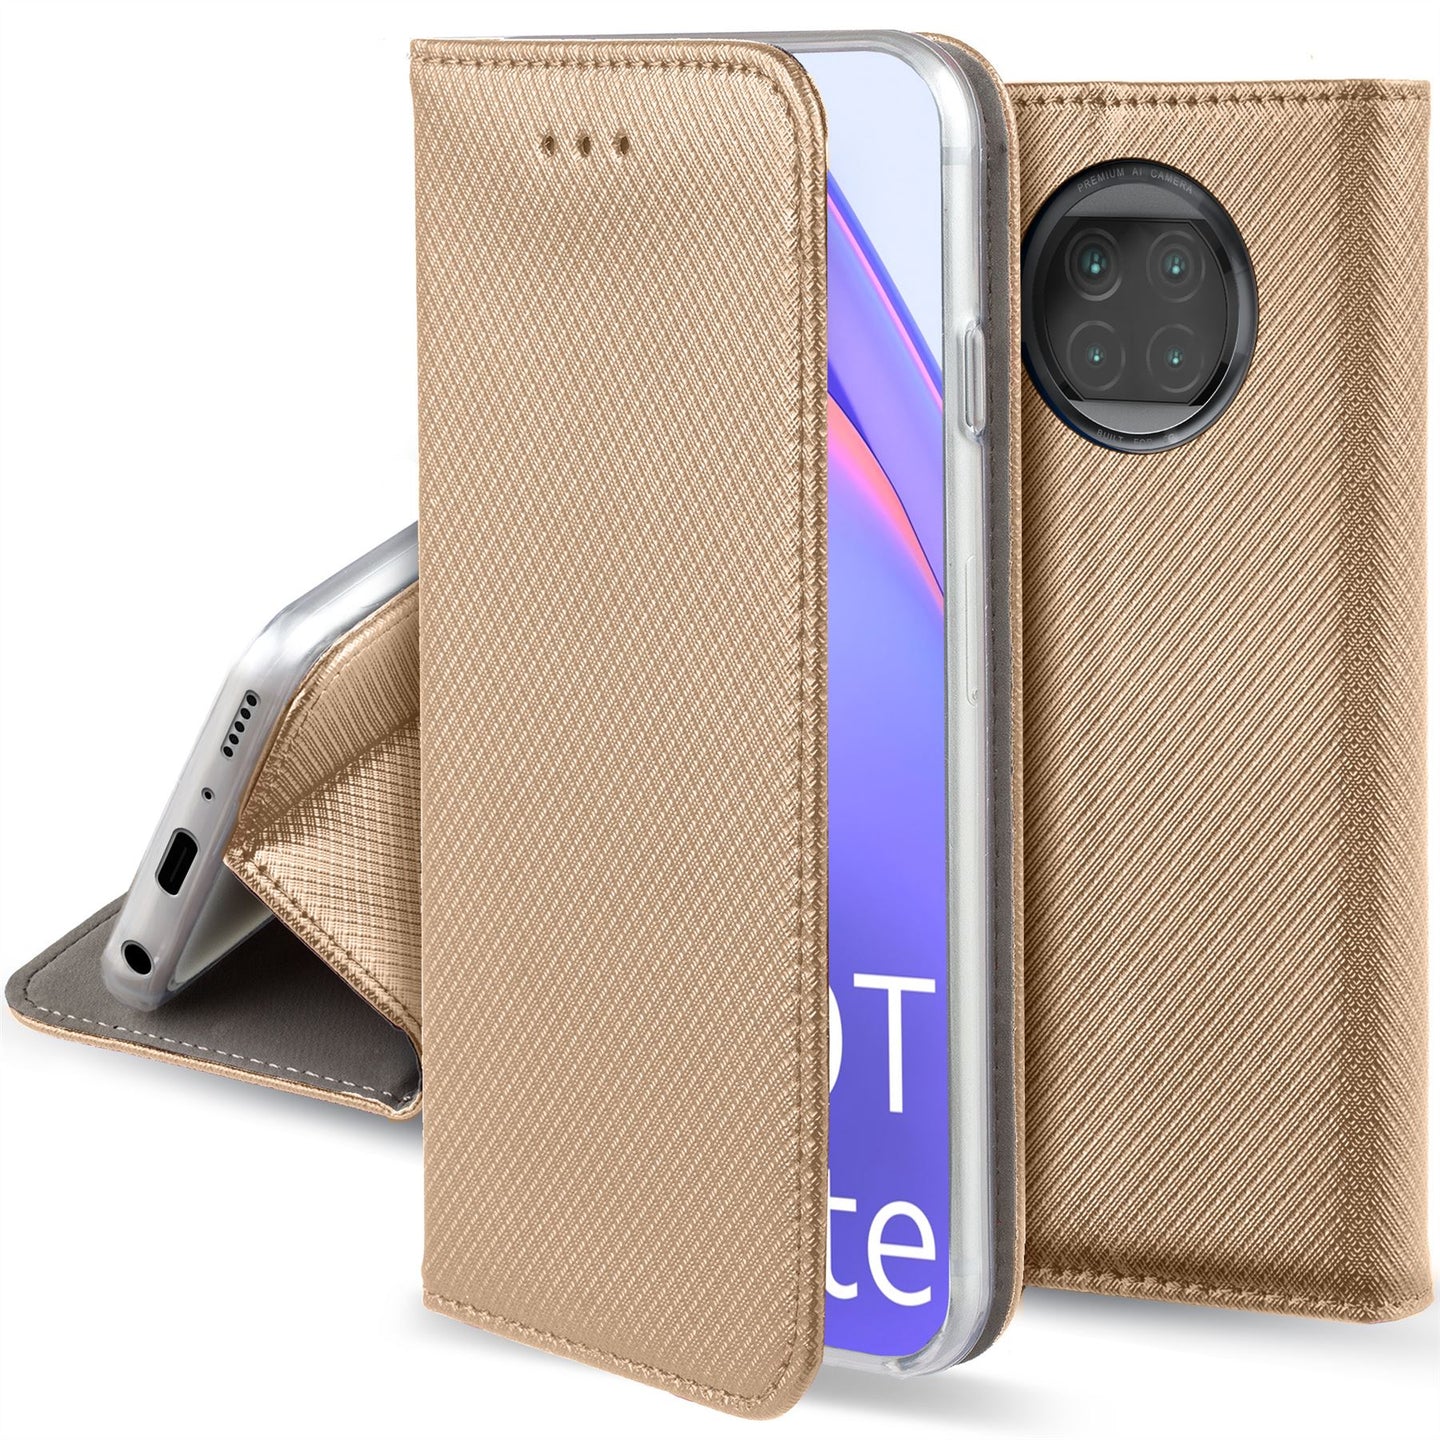 Moozy Case Flip Cover for Xiaomi Mi 10T Lite 5G, Gold - Smart Magnetic Flip Case with Card Holder and Stand